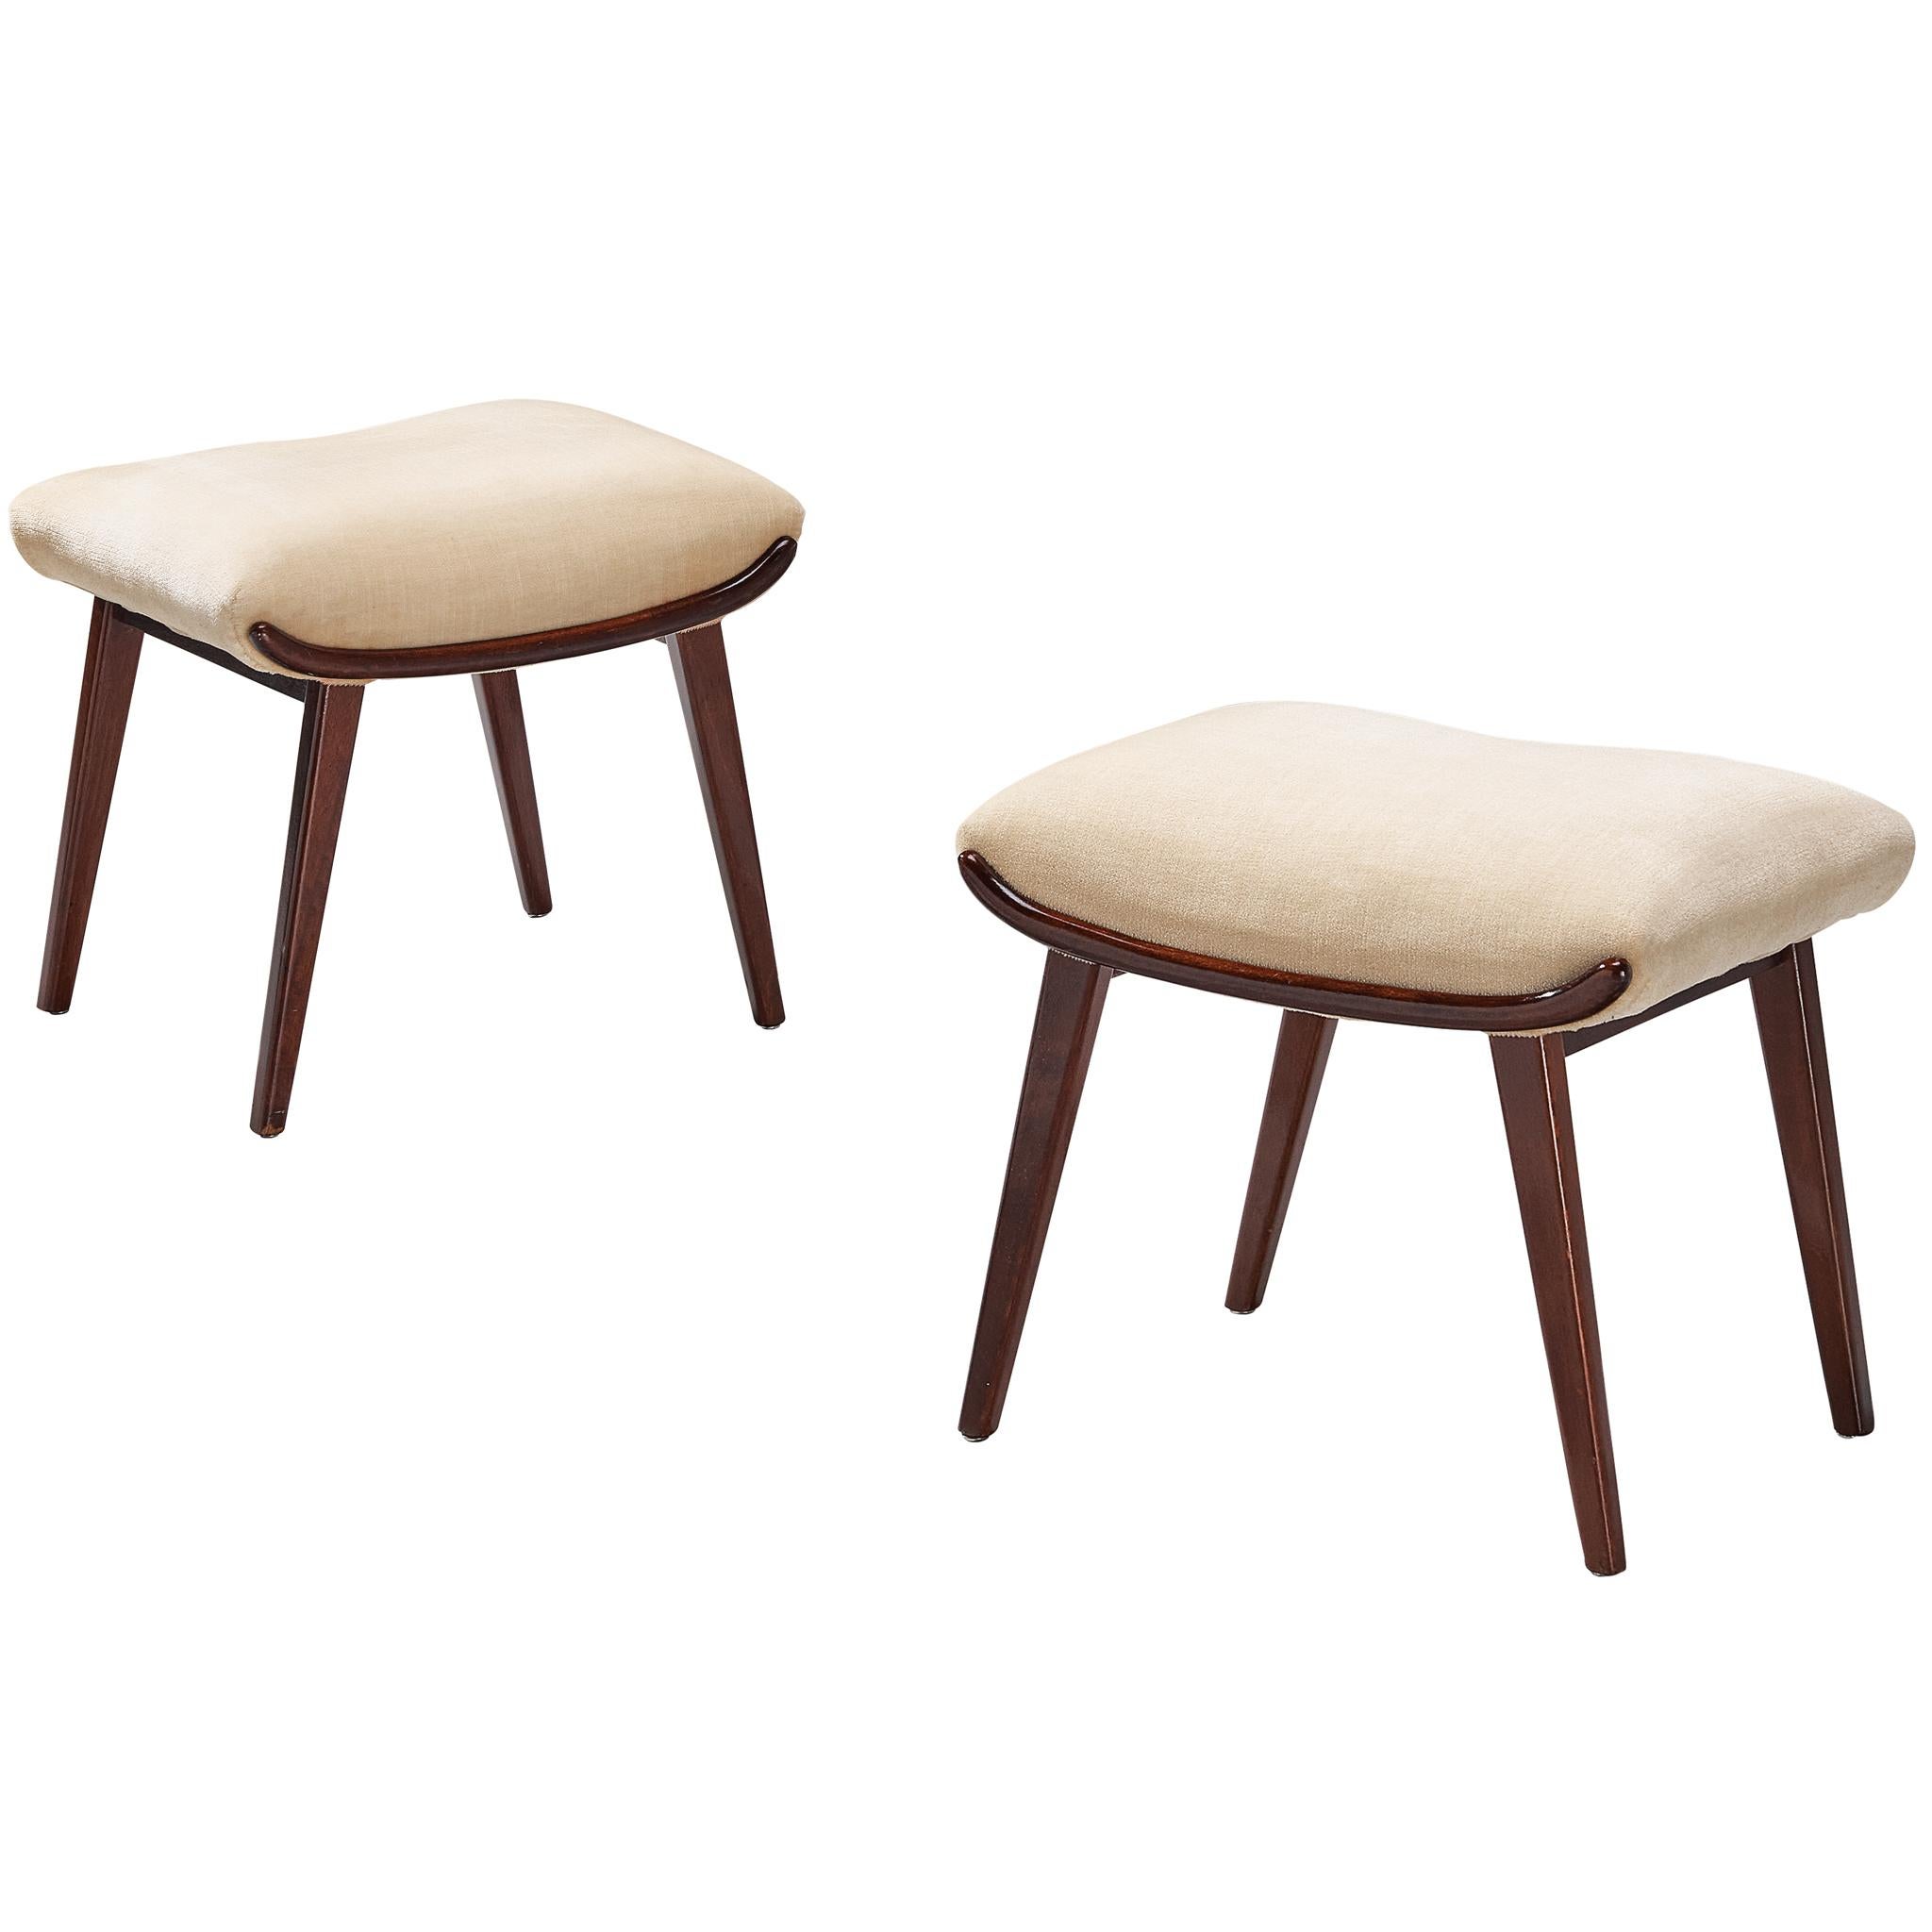 Charming Pair of Ottomans or Stools in Wood and Beige Upholstery 